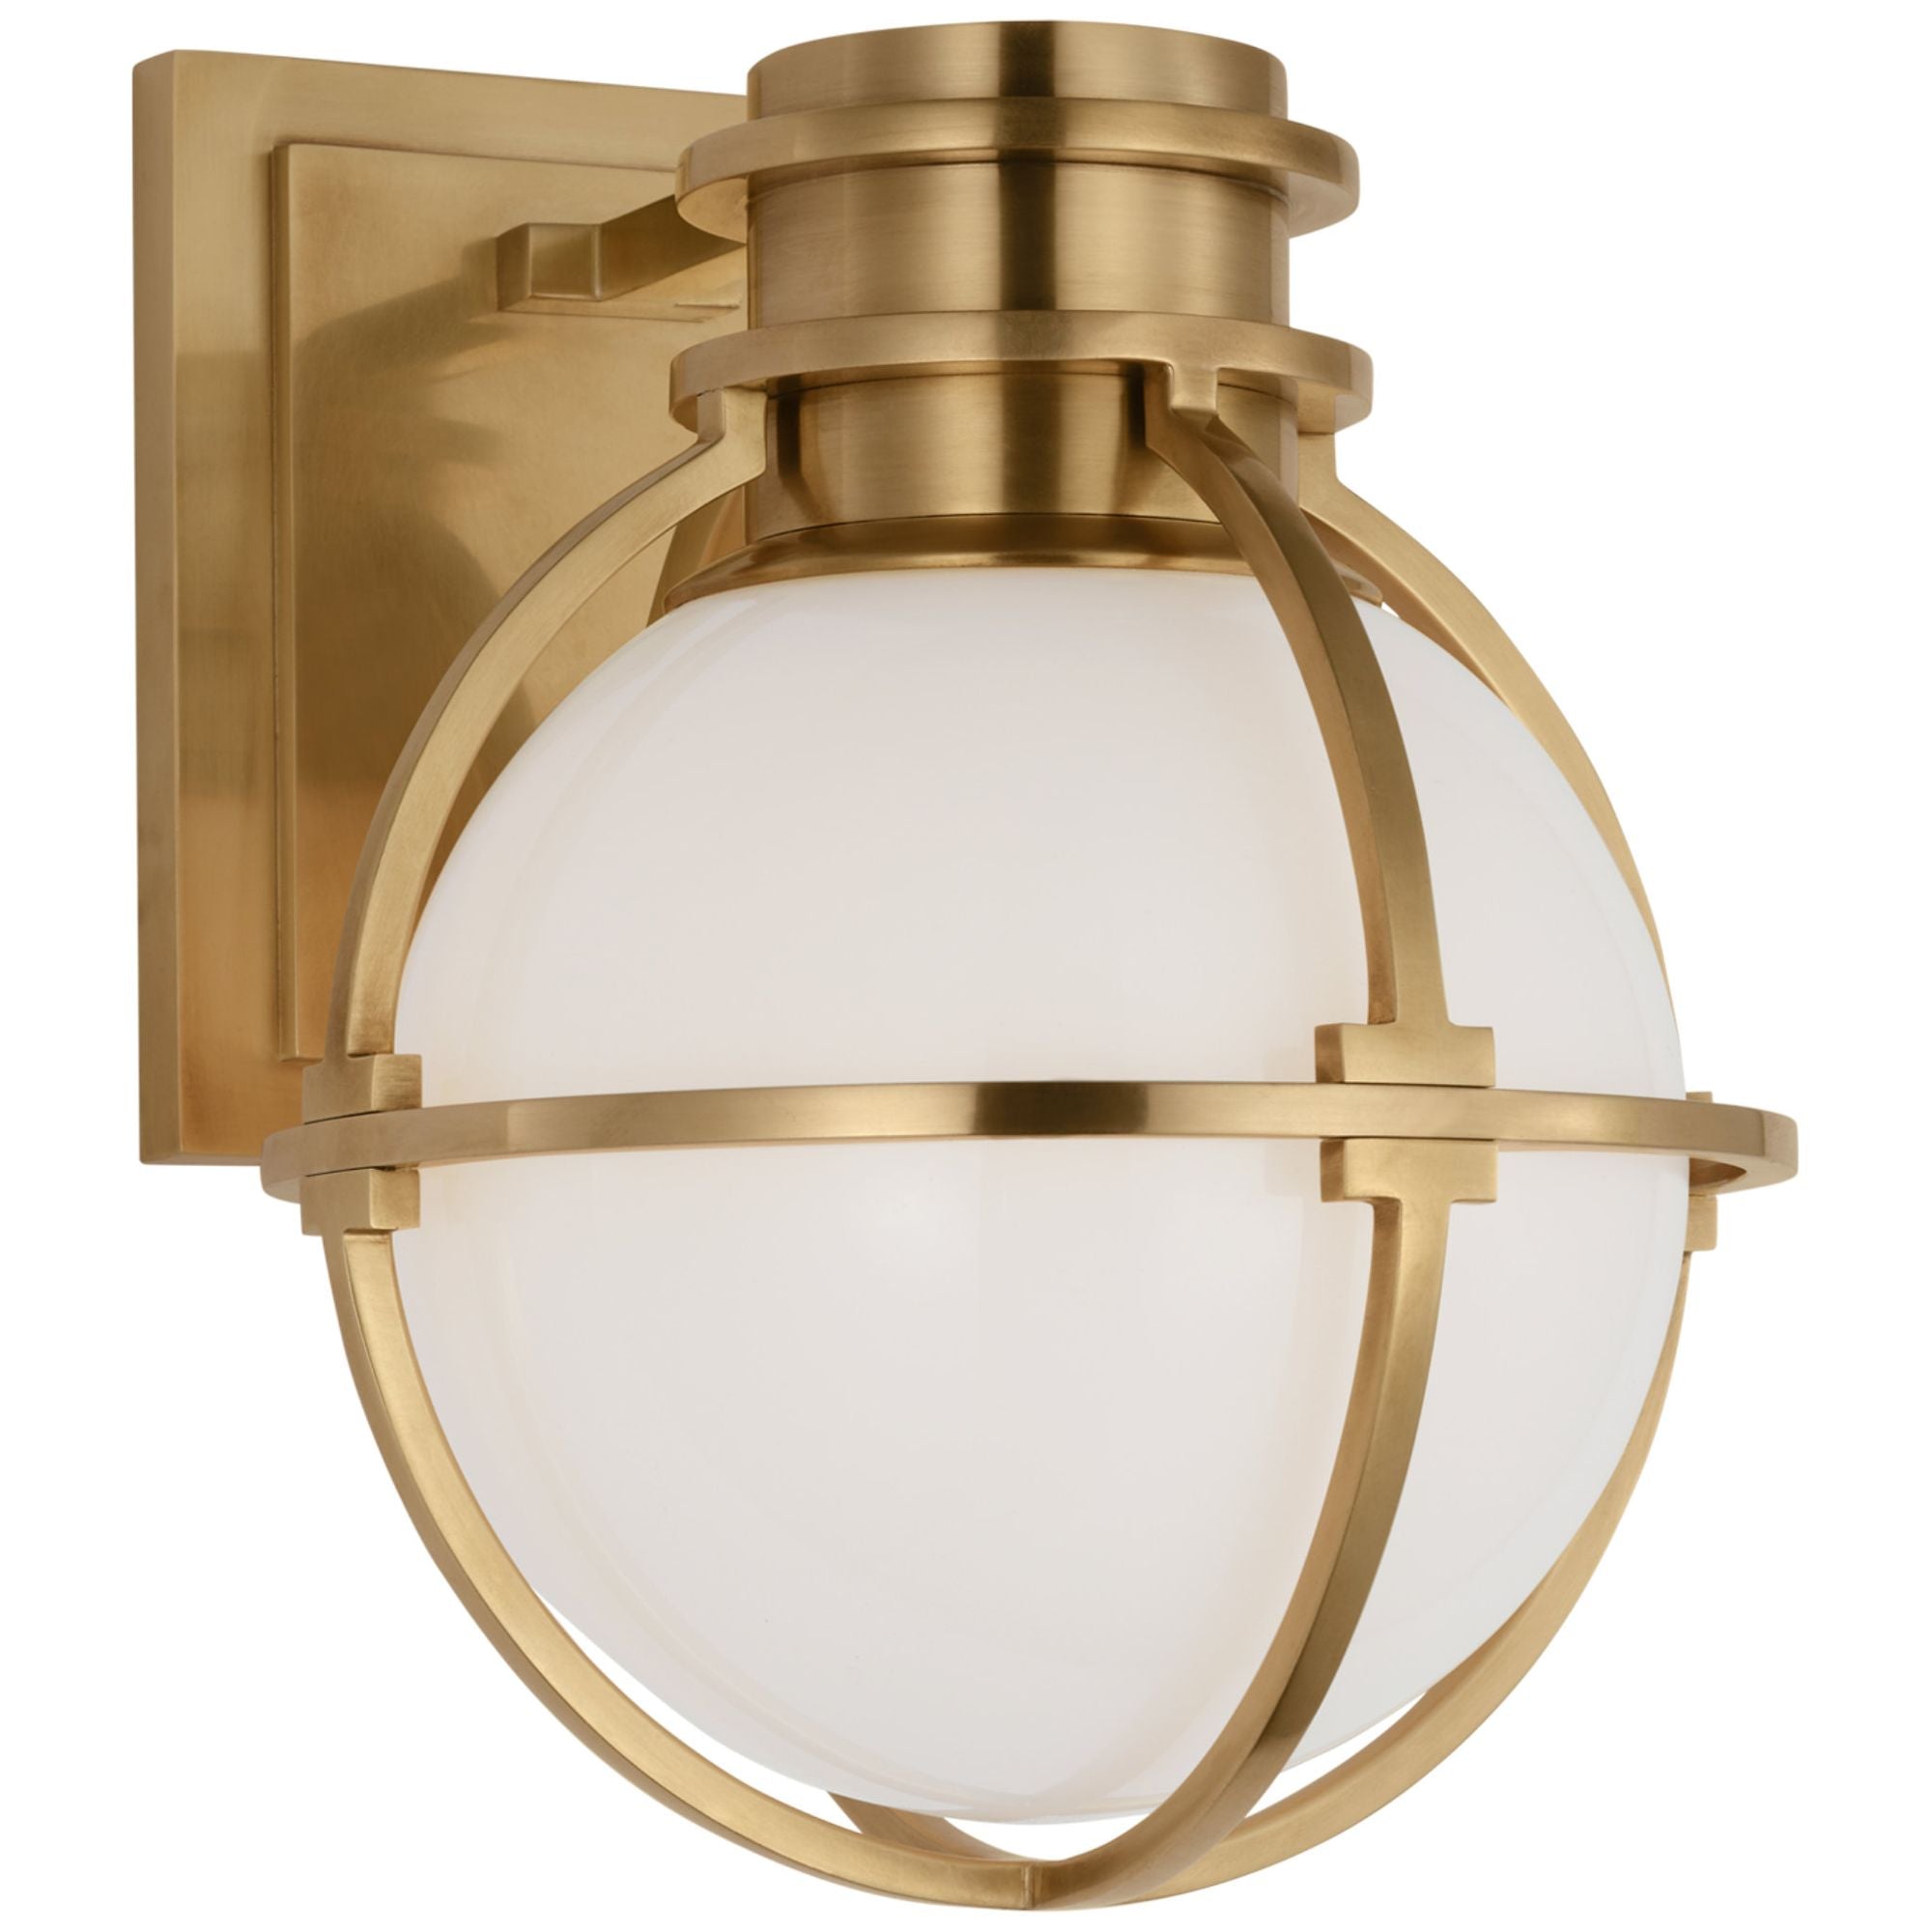 Chapman & Myers Gracie Single Sconce in Antique-Burnished Brass with White Glass